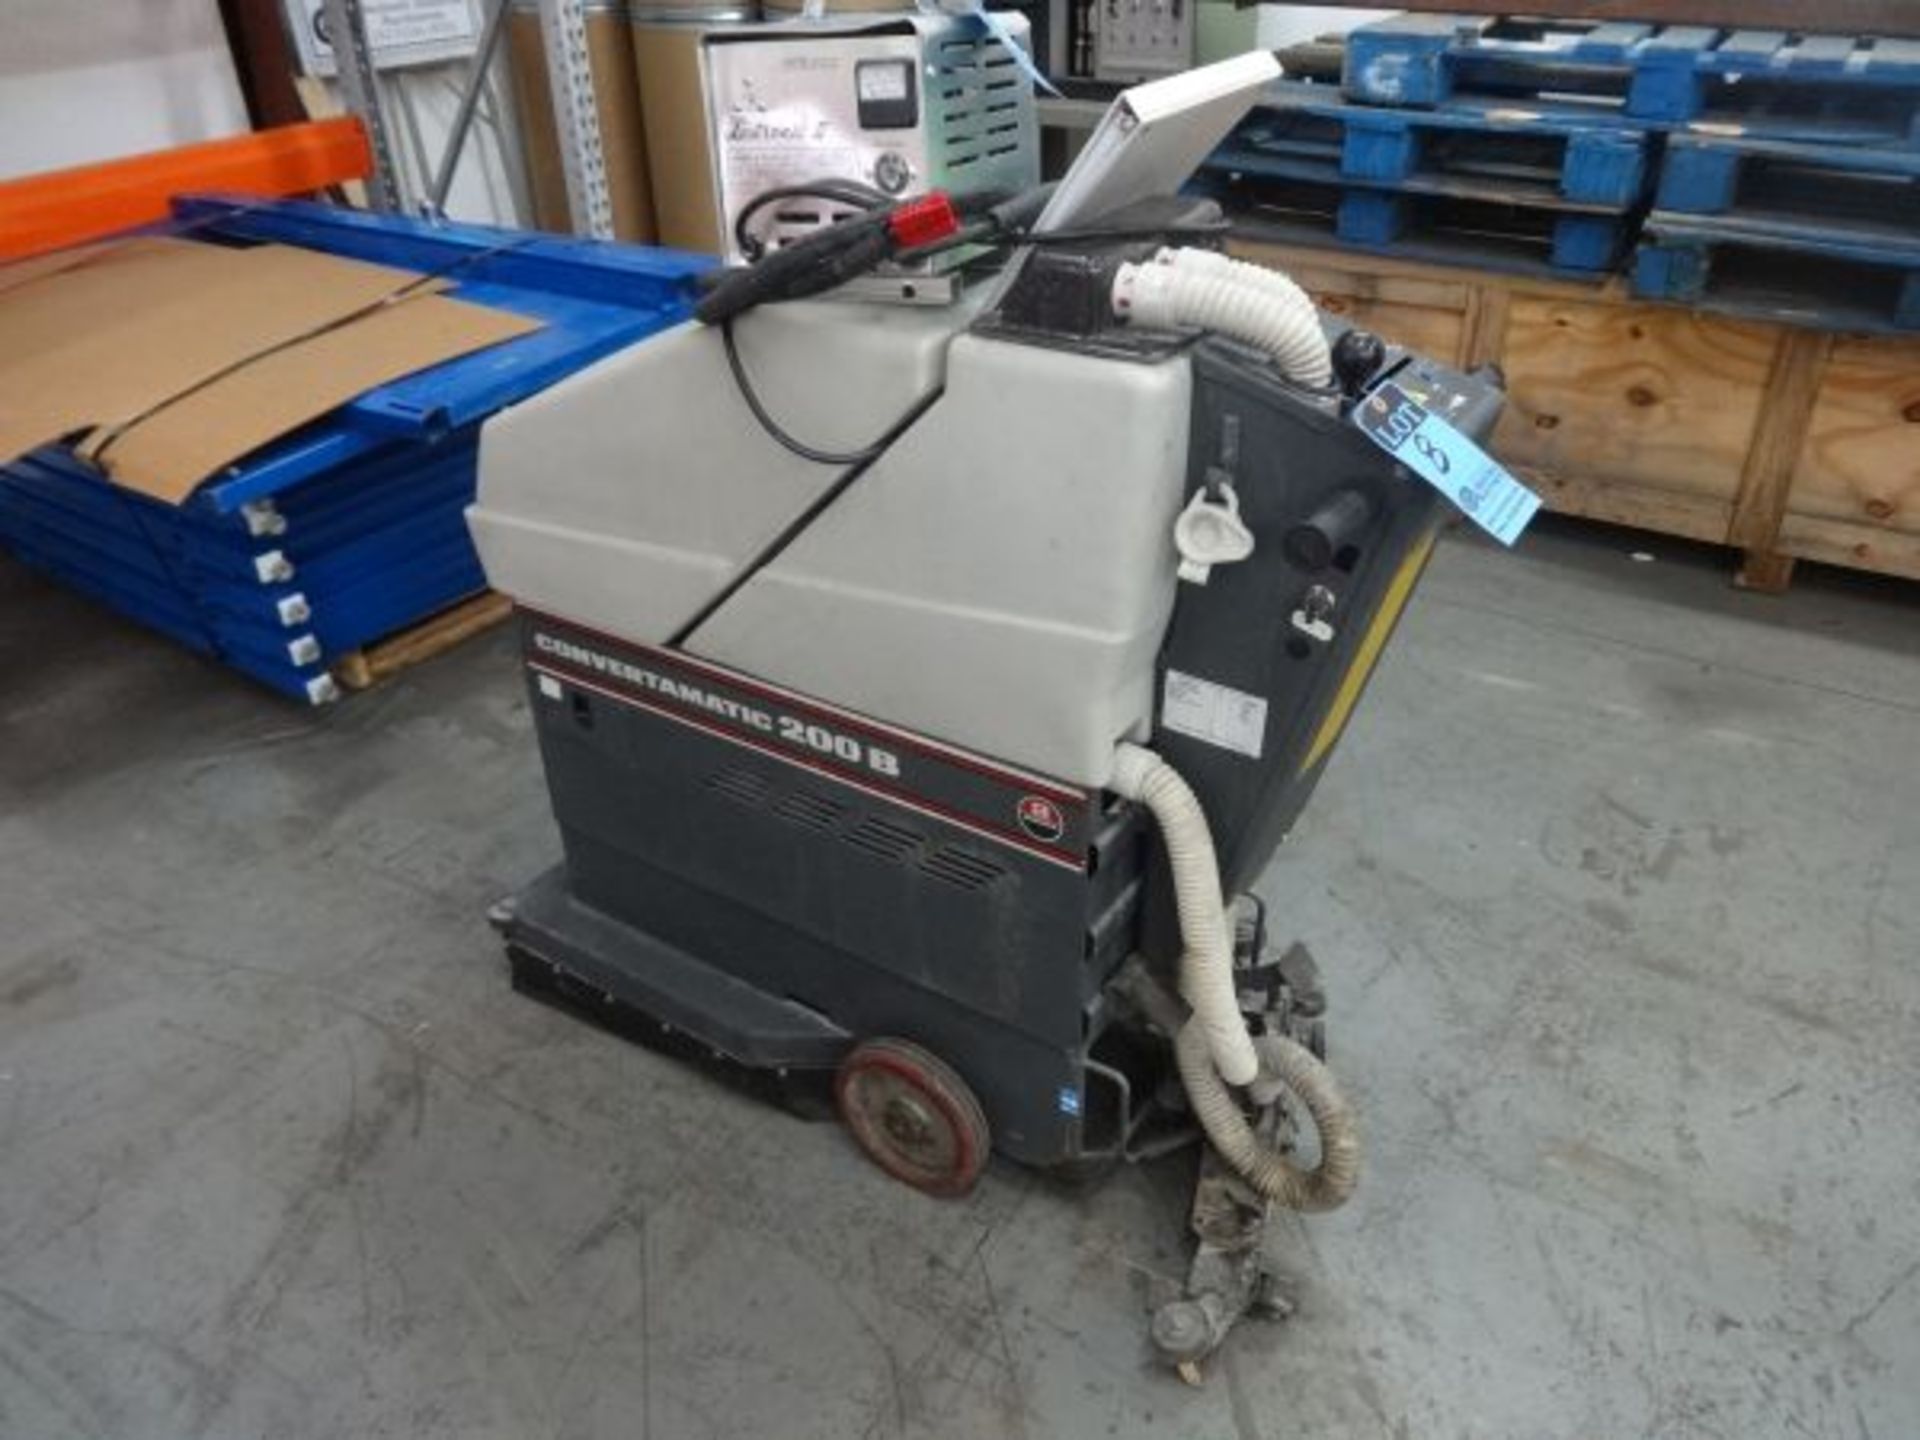 ADVANCE MODEL CONVERTAMATIC 200B WALK BEHIND ELECTRIC SCRUBBER; S/N 1280238, W/ LESTRONIC CHARGER